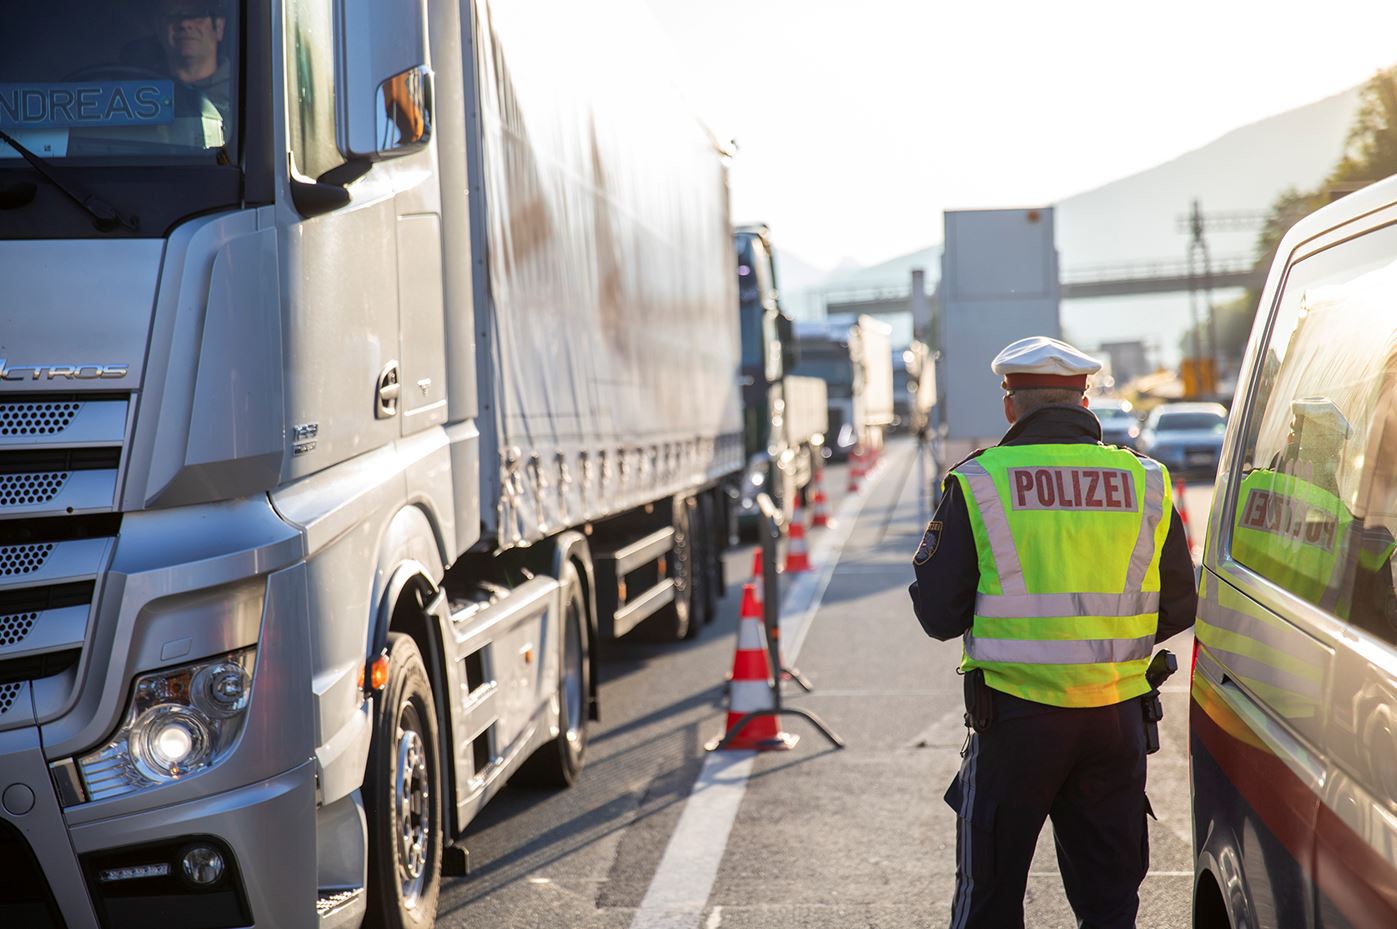 Tyrol: HGVs to be processed in blocks at least 30 times in 2019